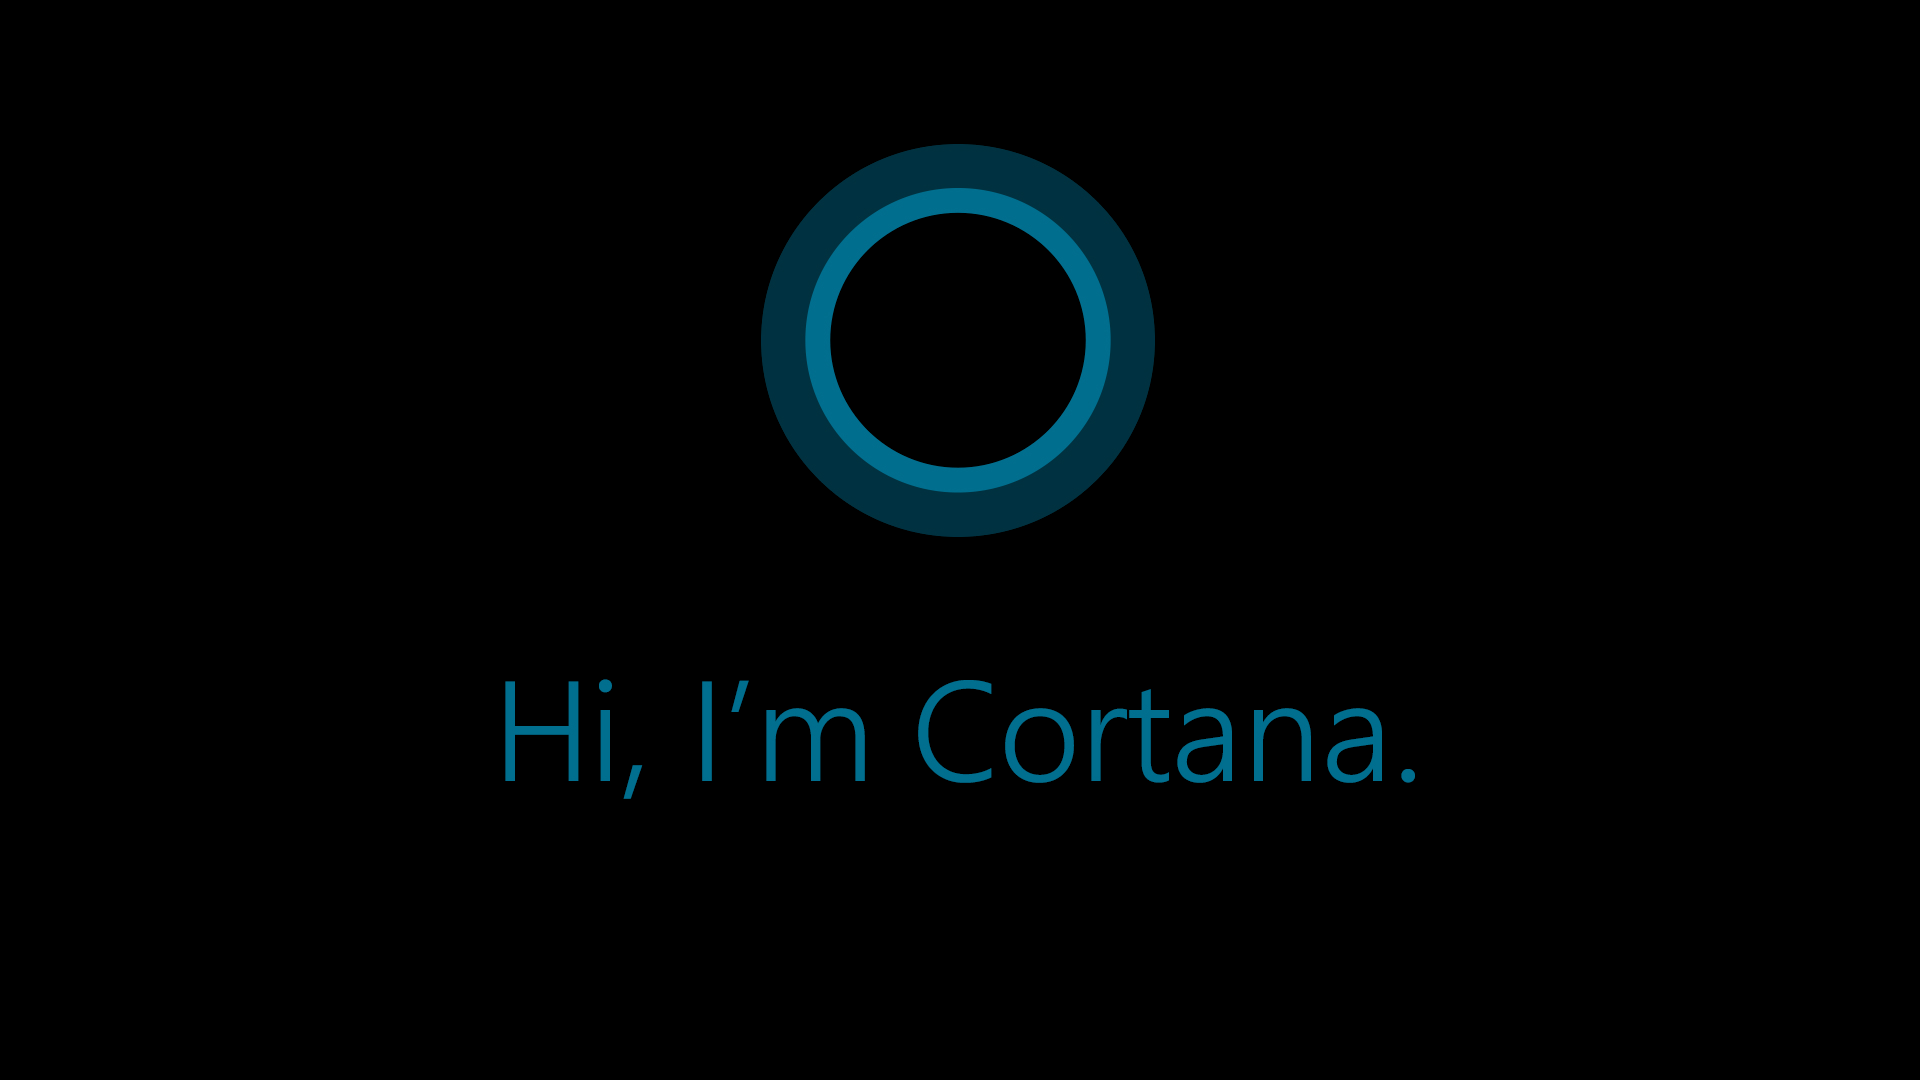 Cortana is now available for iPad tablets